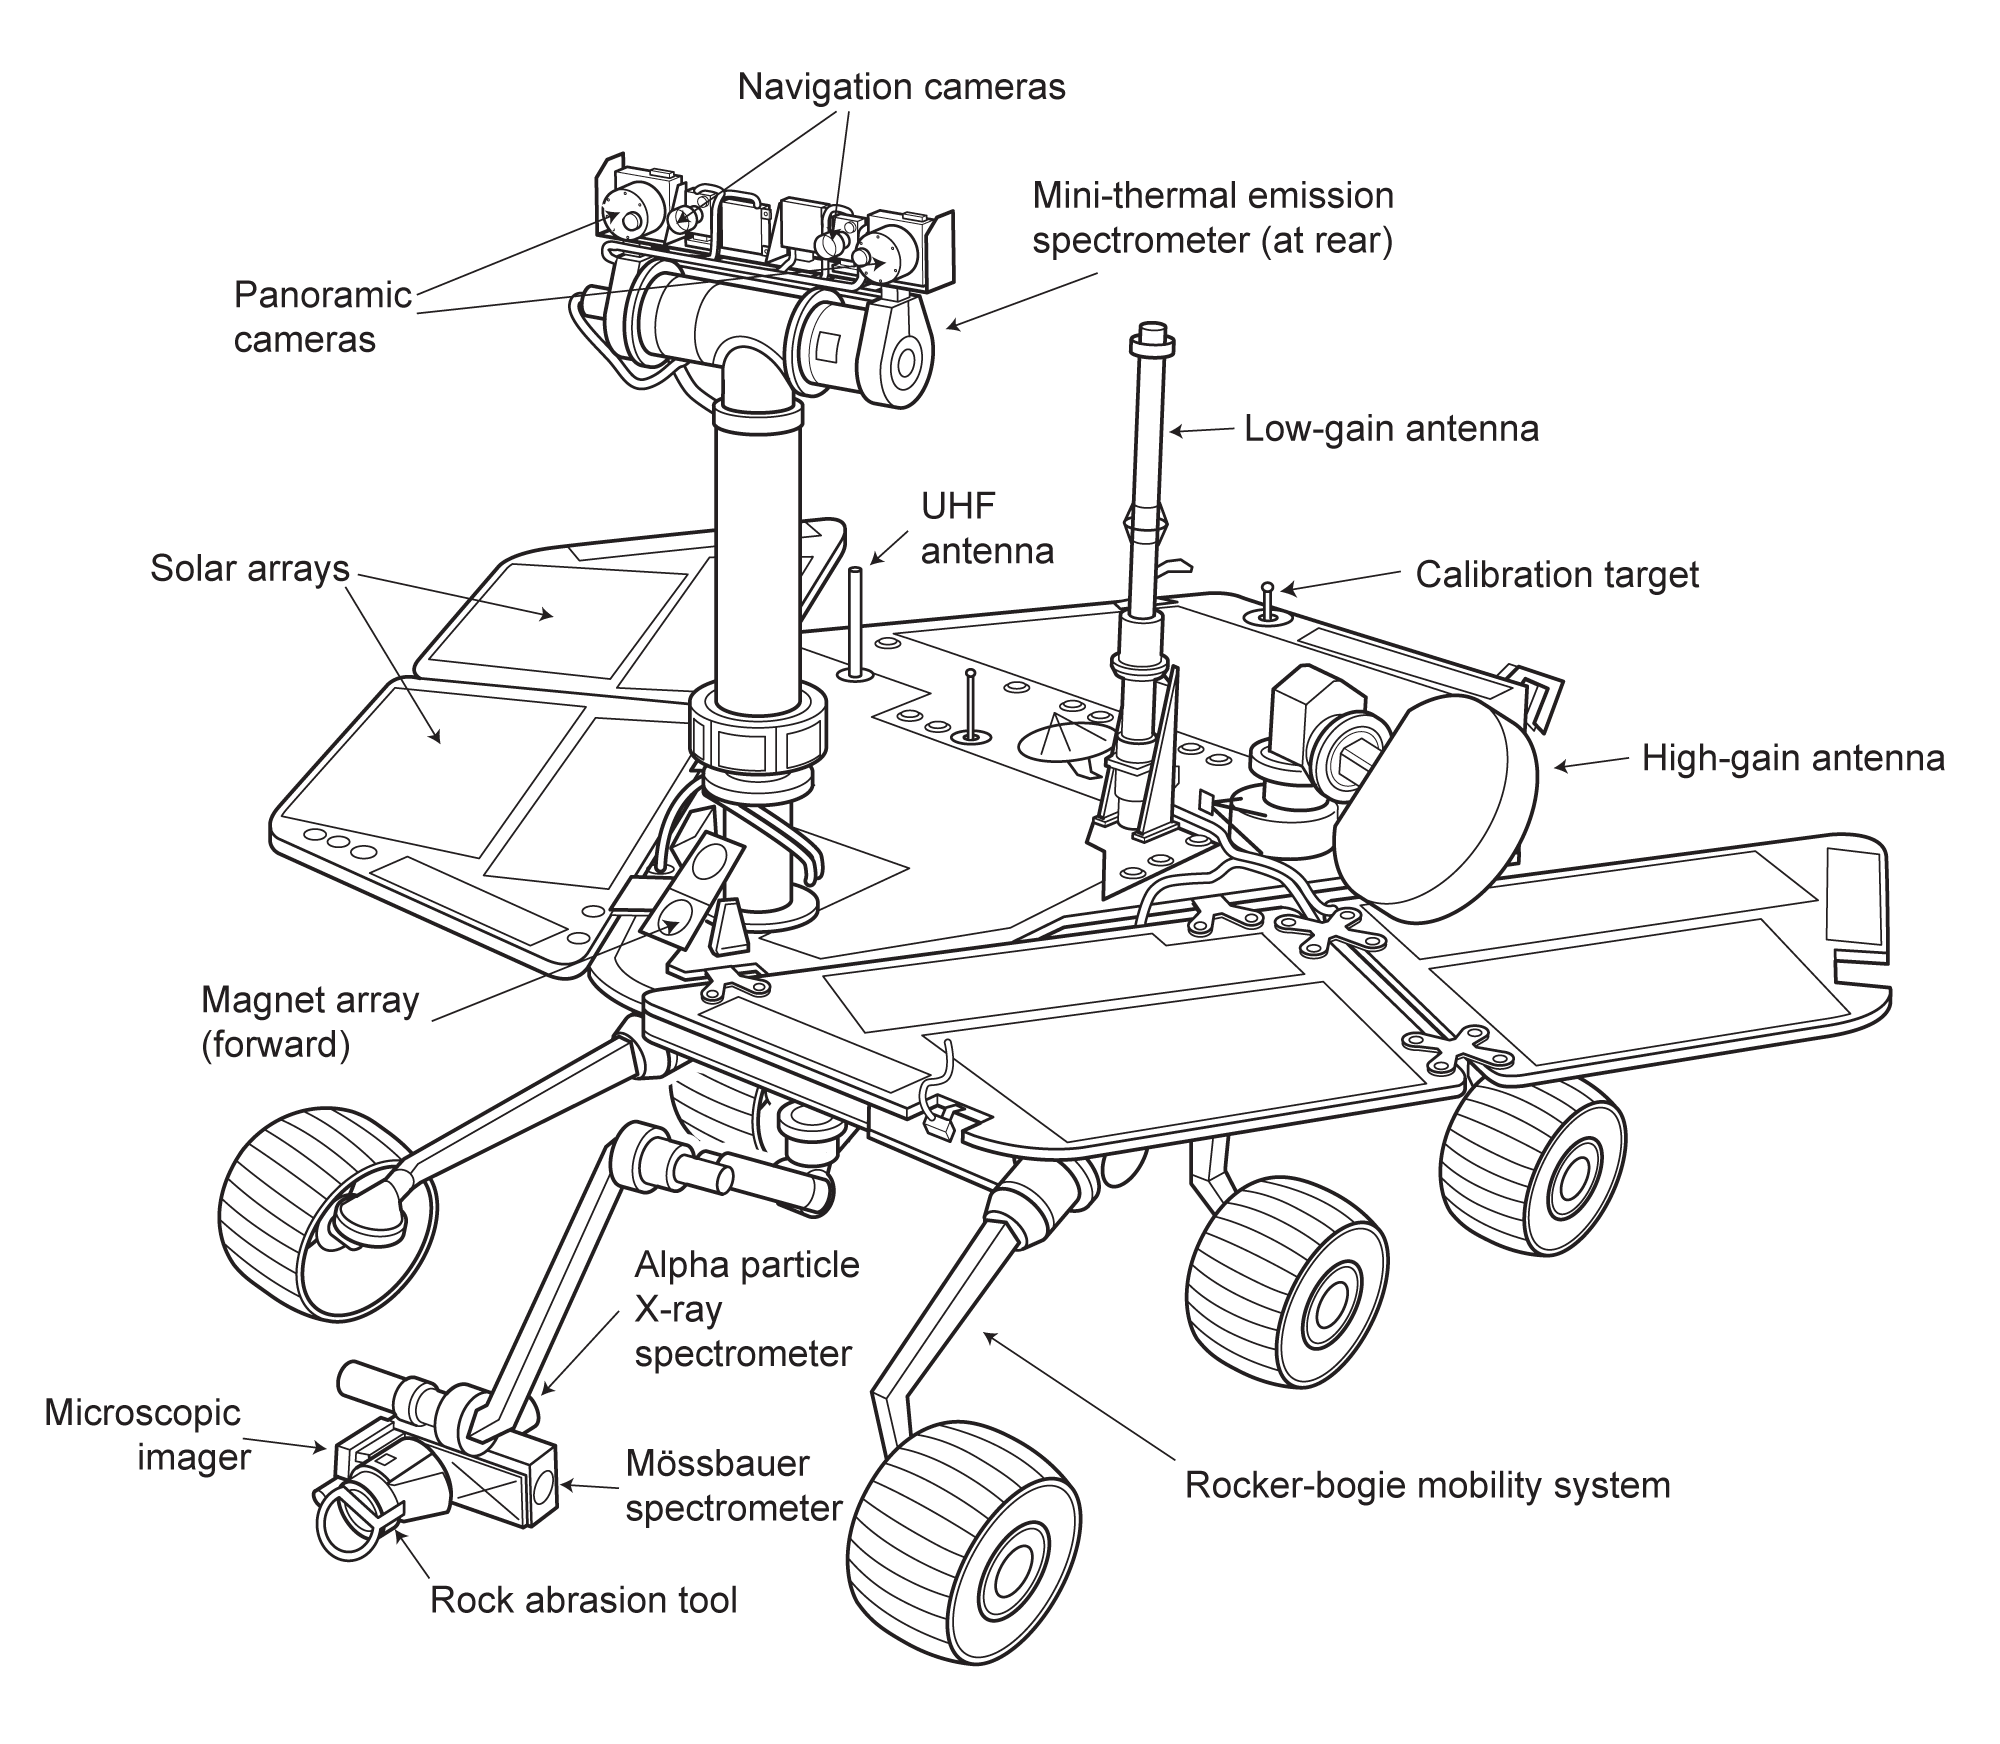 Mars Exploration Rover Spacecraft Diagram The Planetary Society